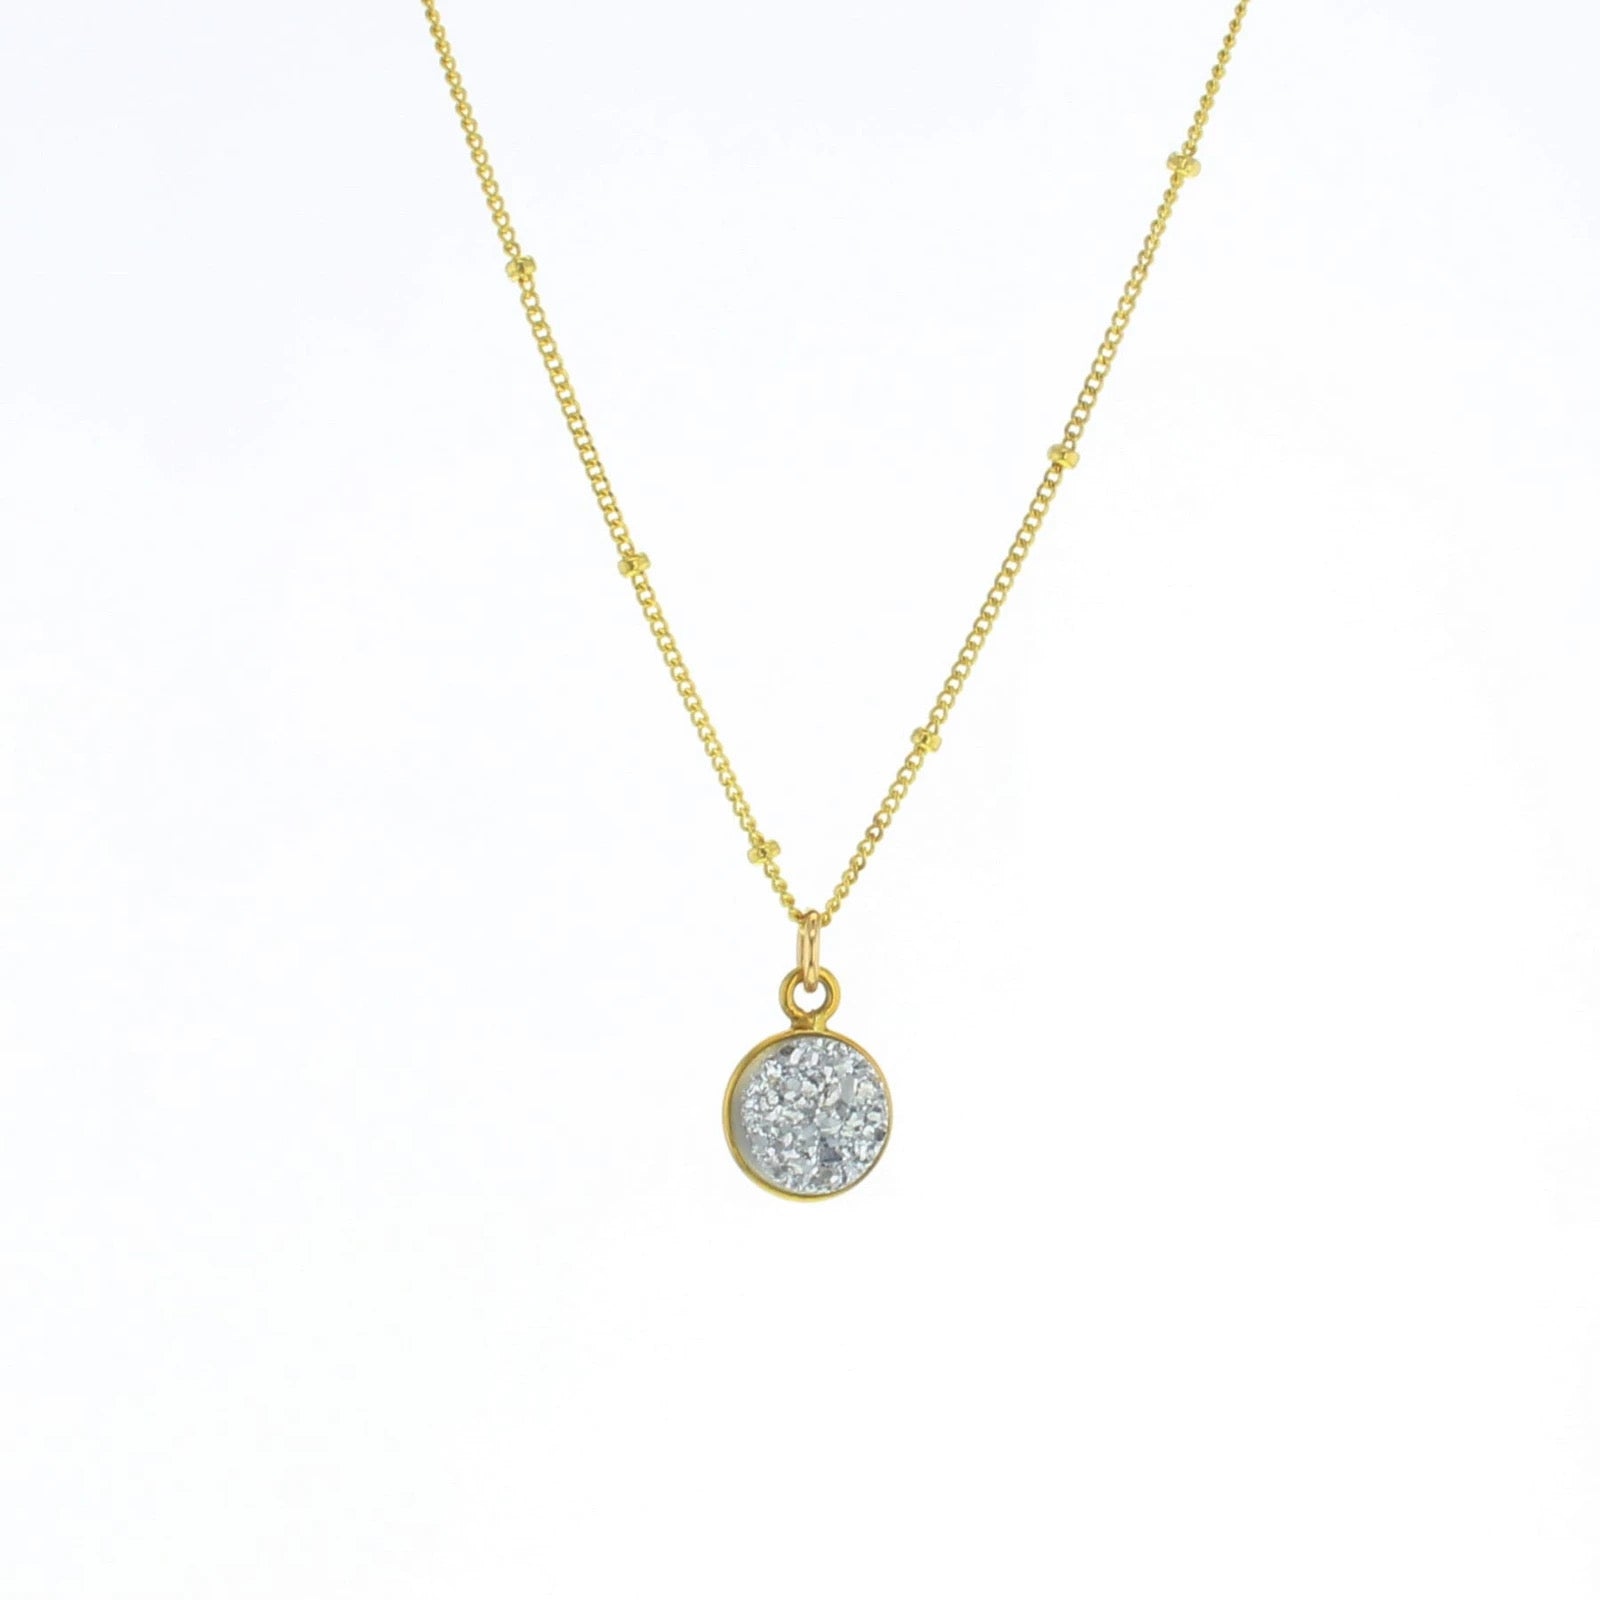 Gold Luster Necklace